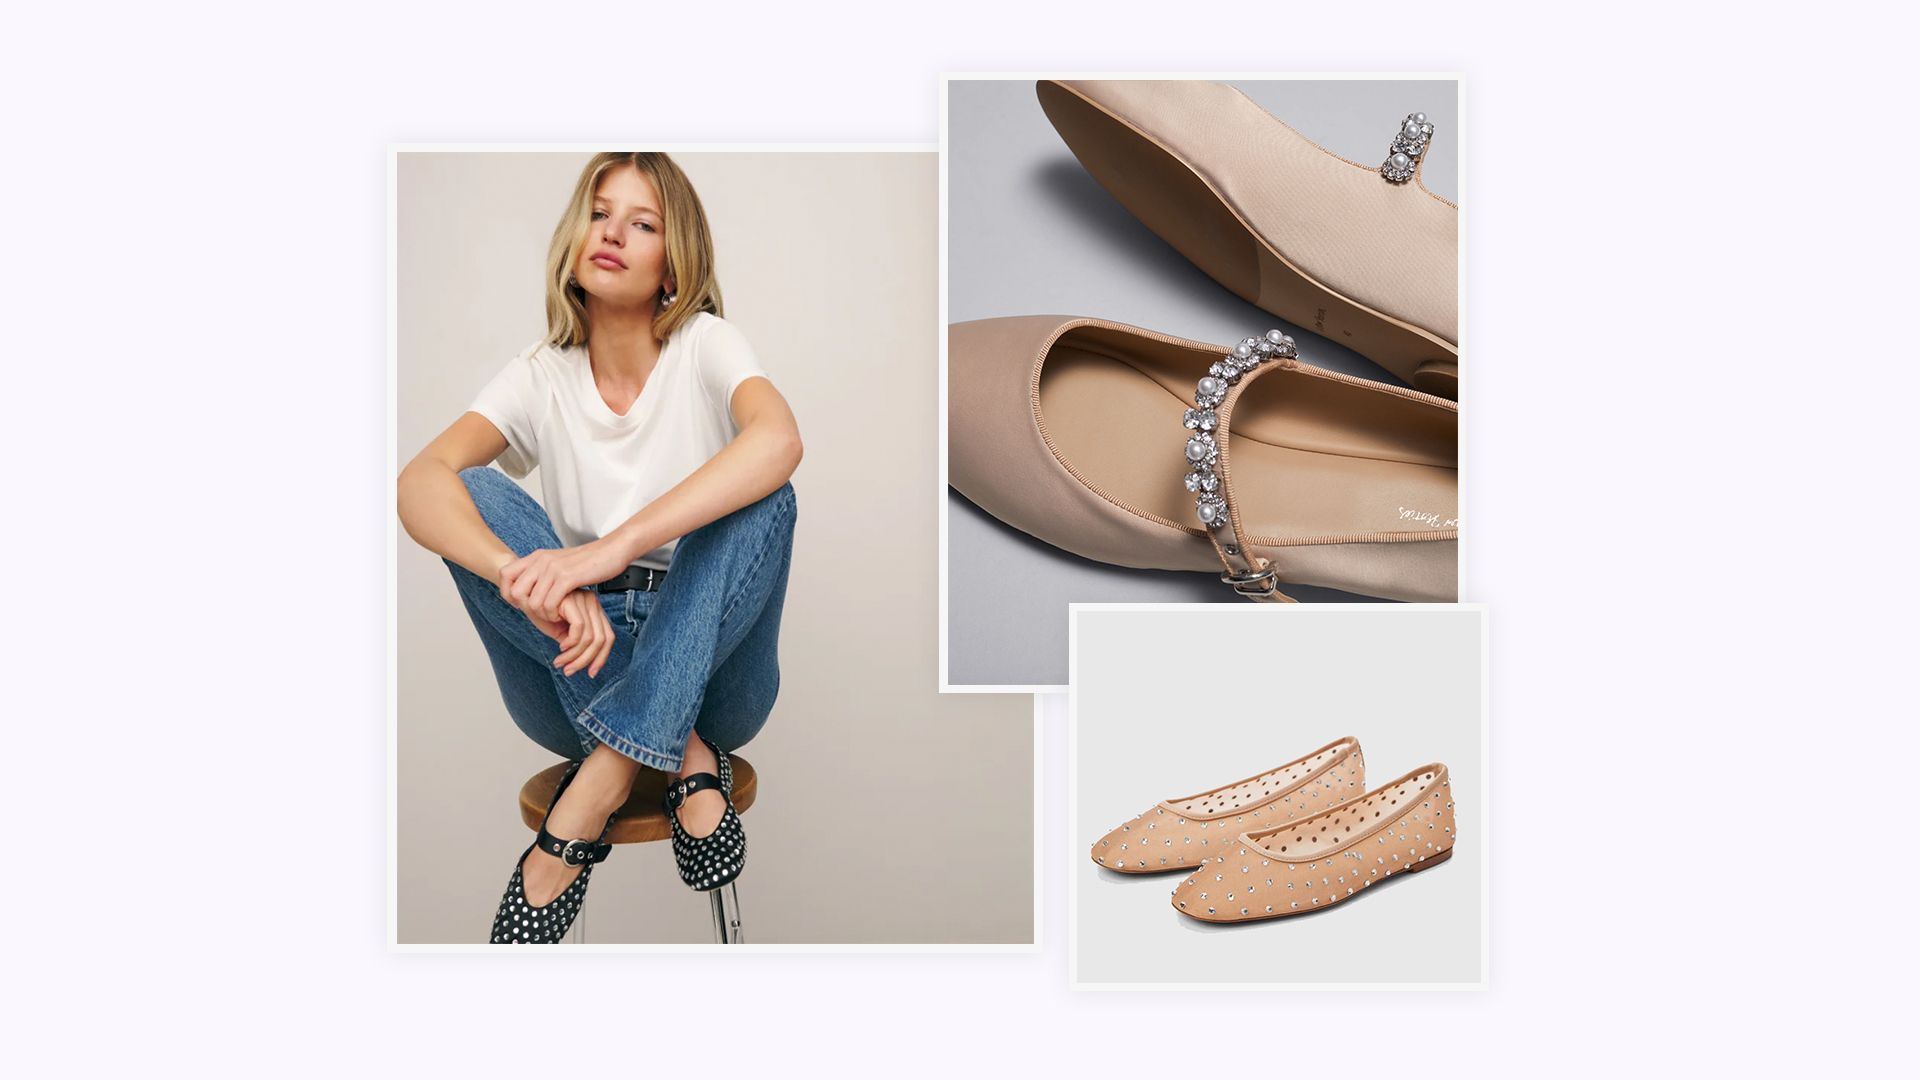 11 ballet flats that will look chic with everything this spring